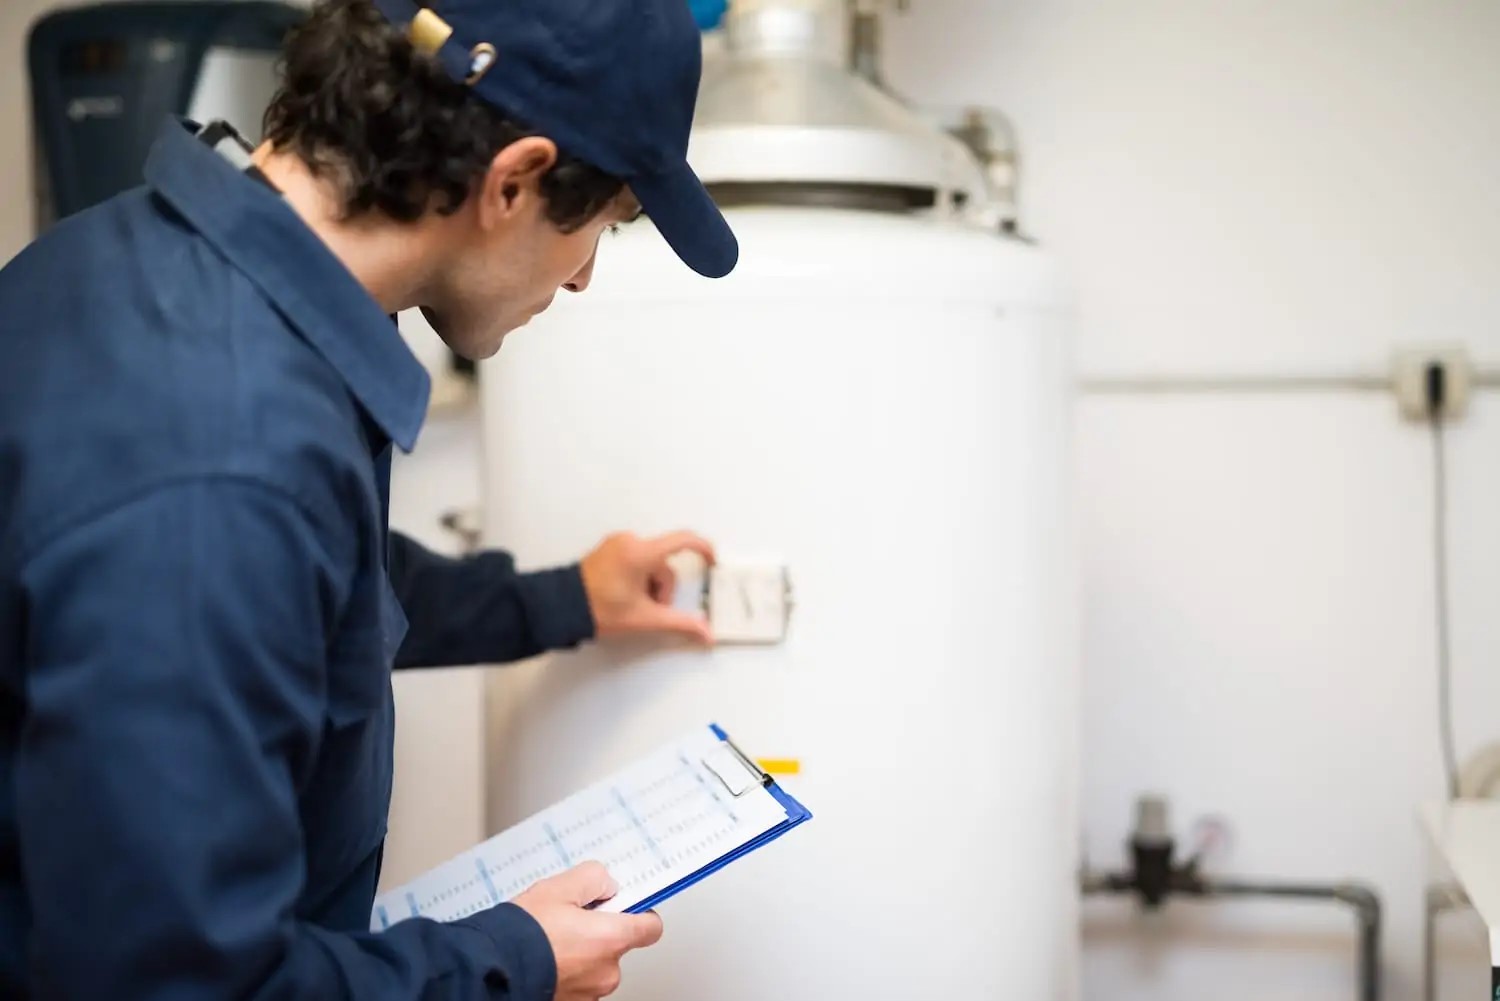 Plumber with hand on a newly installed water heater